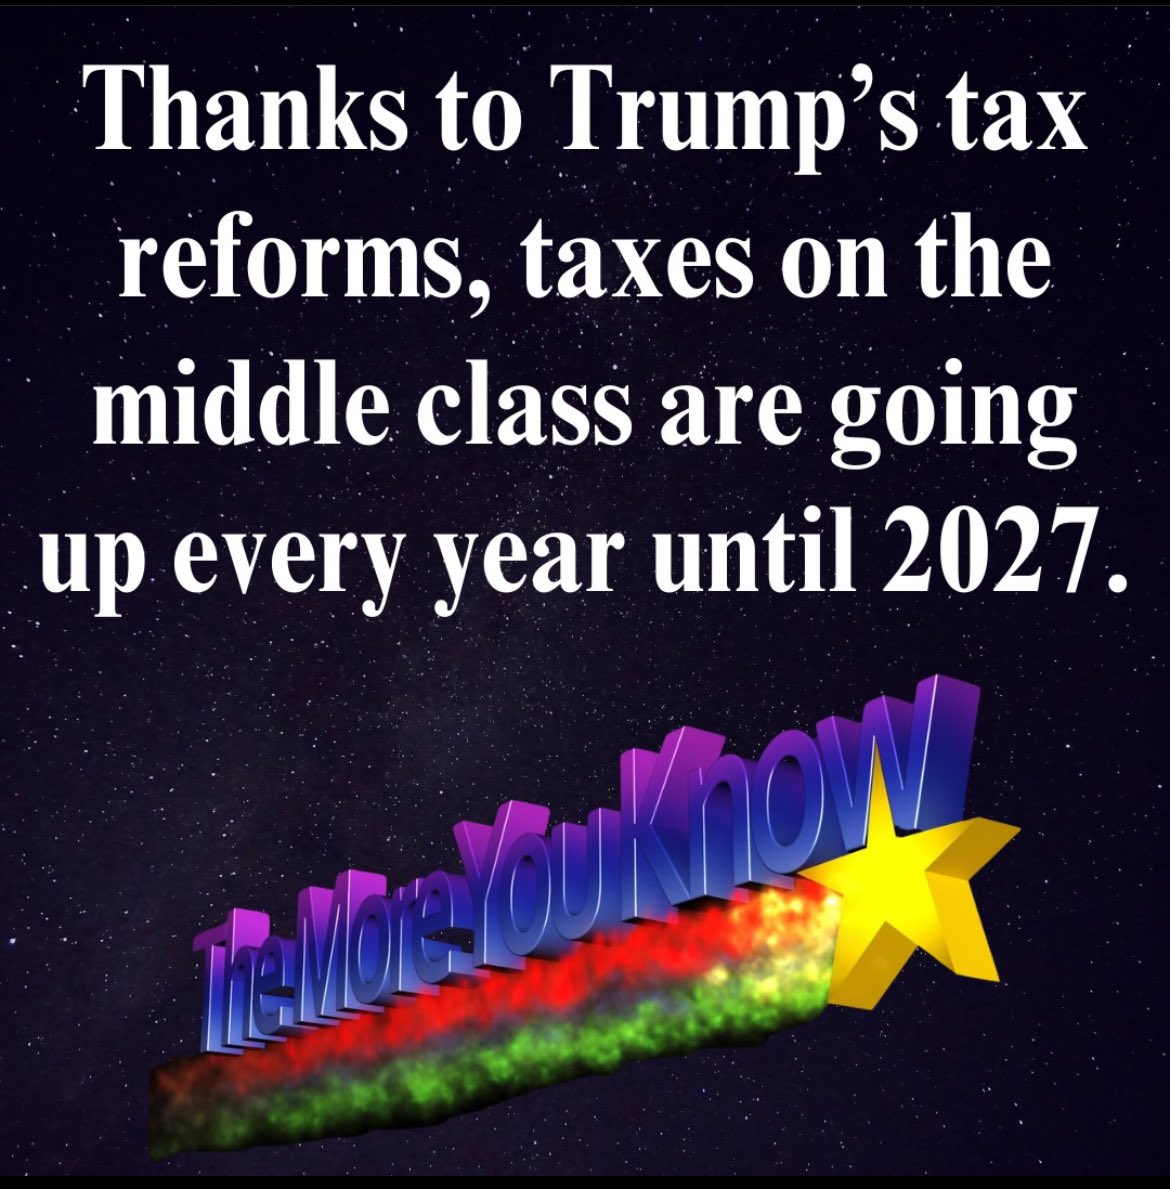 Tax increases for the middle class were built into the Trump tax cuts. #TheMoreYouKnow